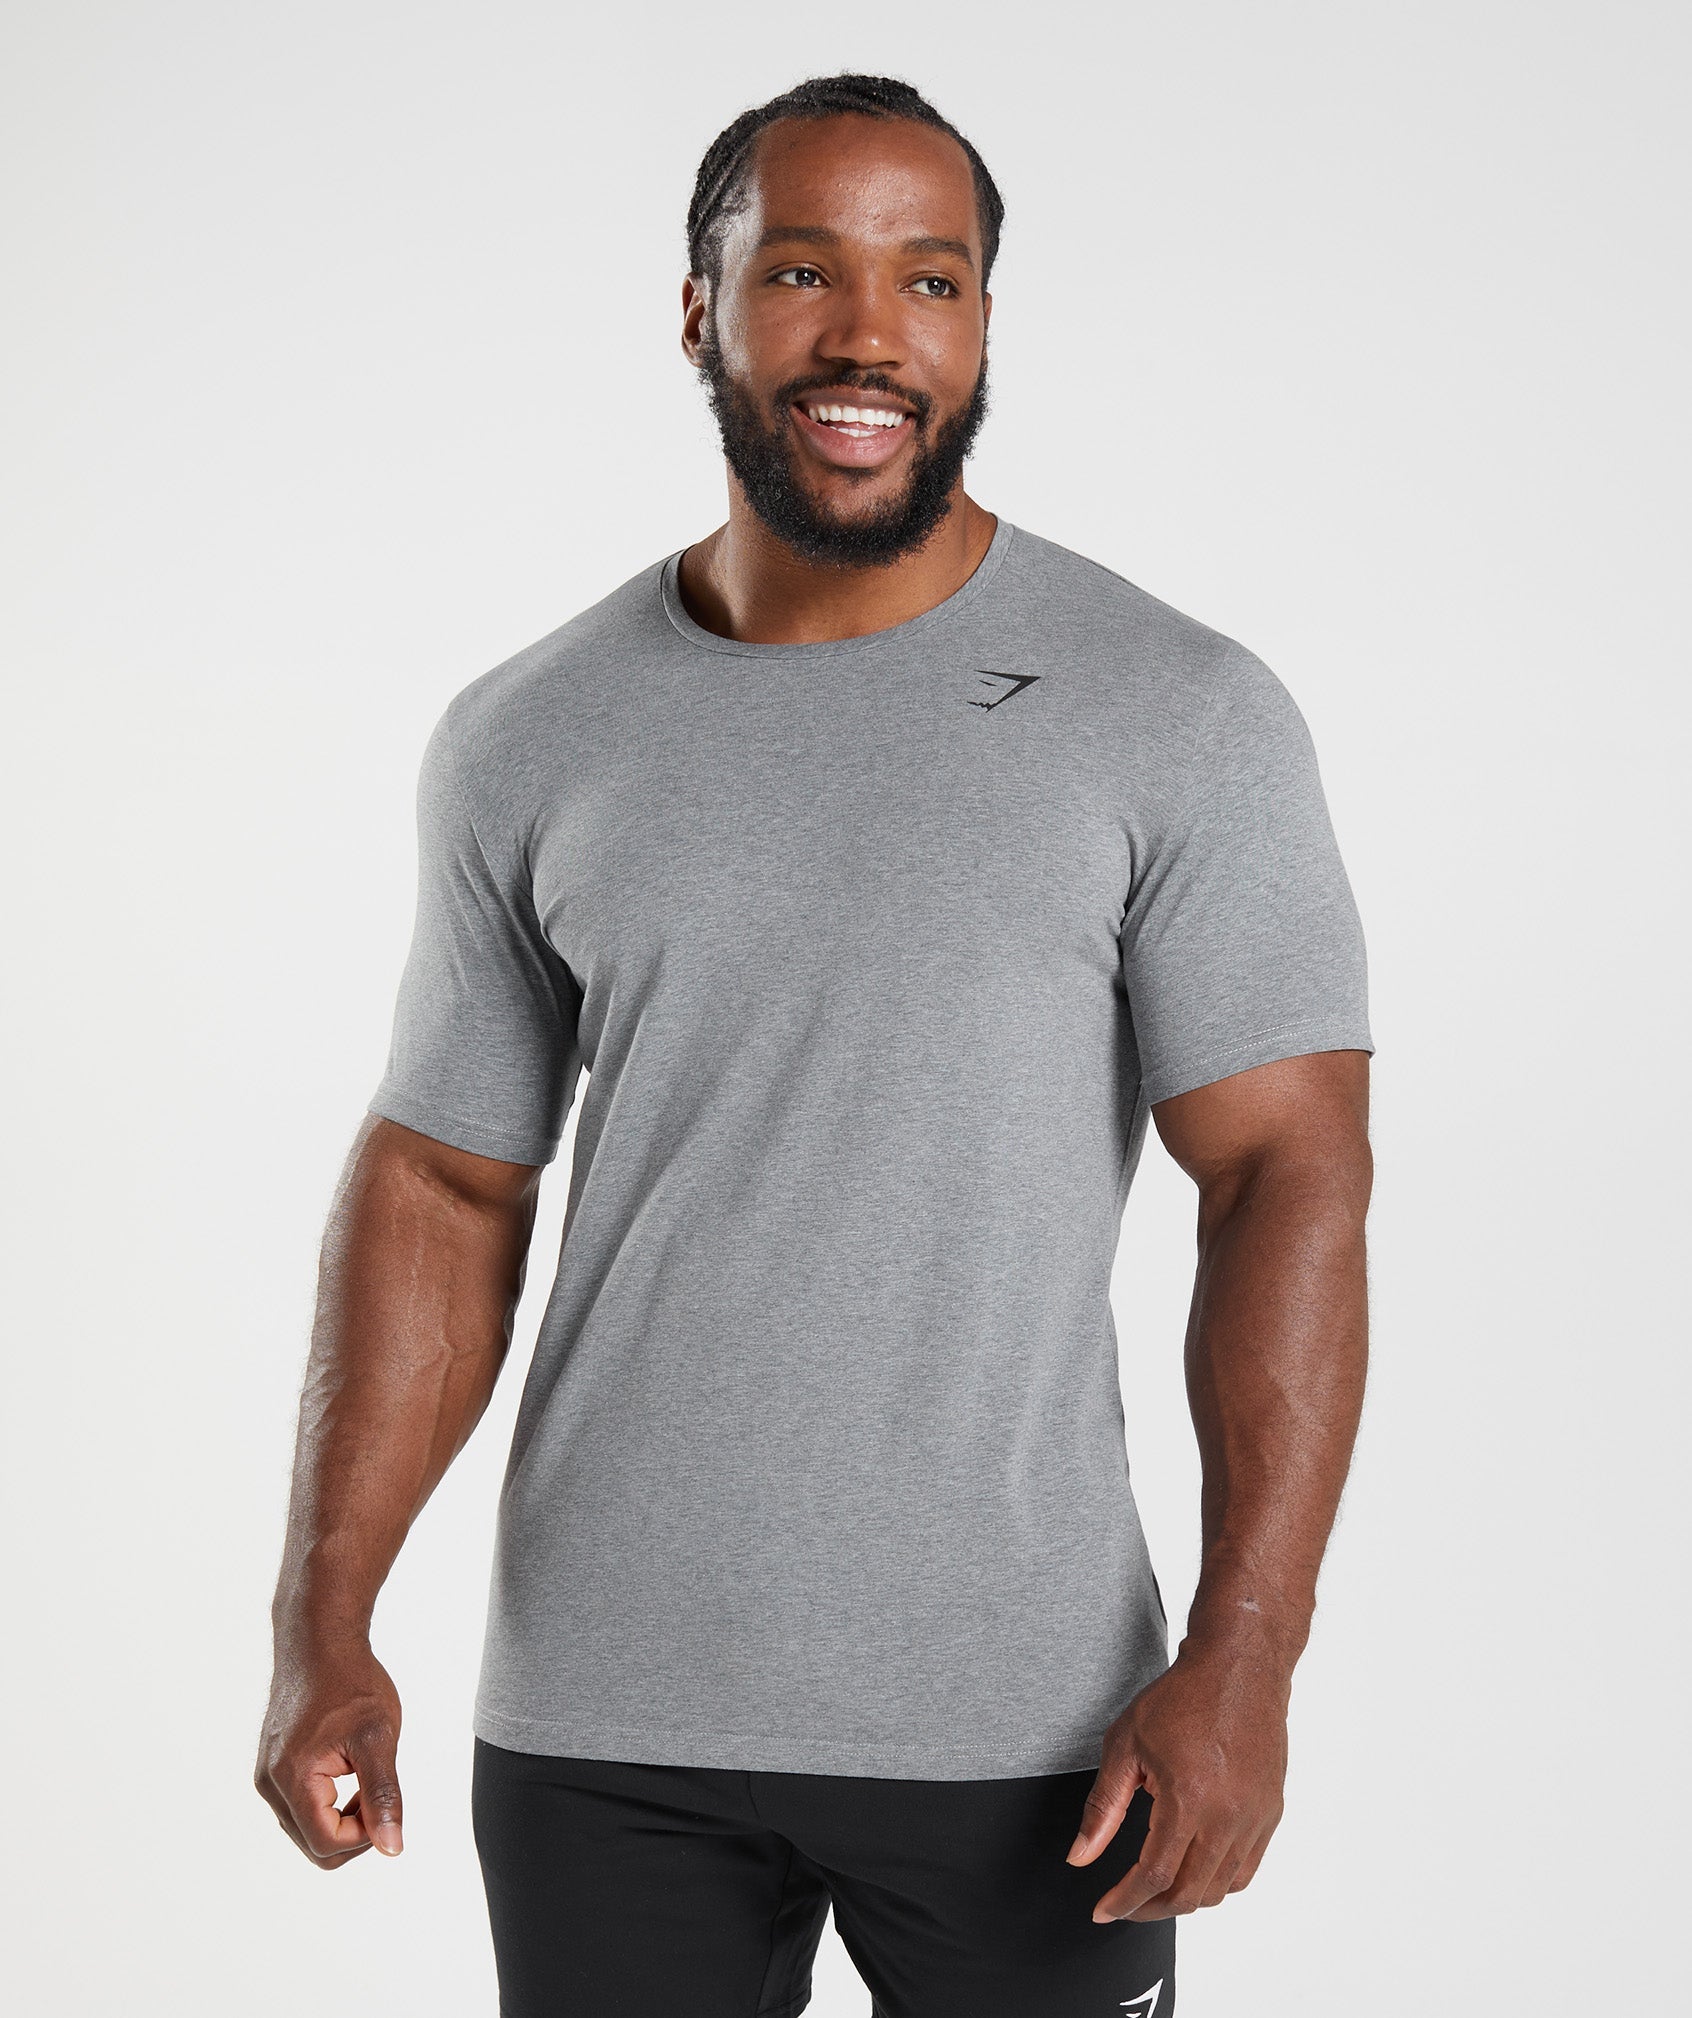 Essential T-Shirt in Charcoal Grey Marl - view 1